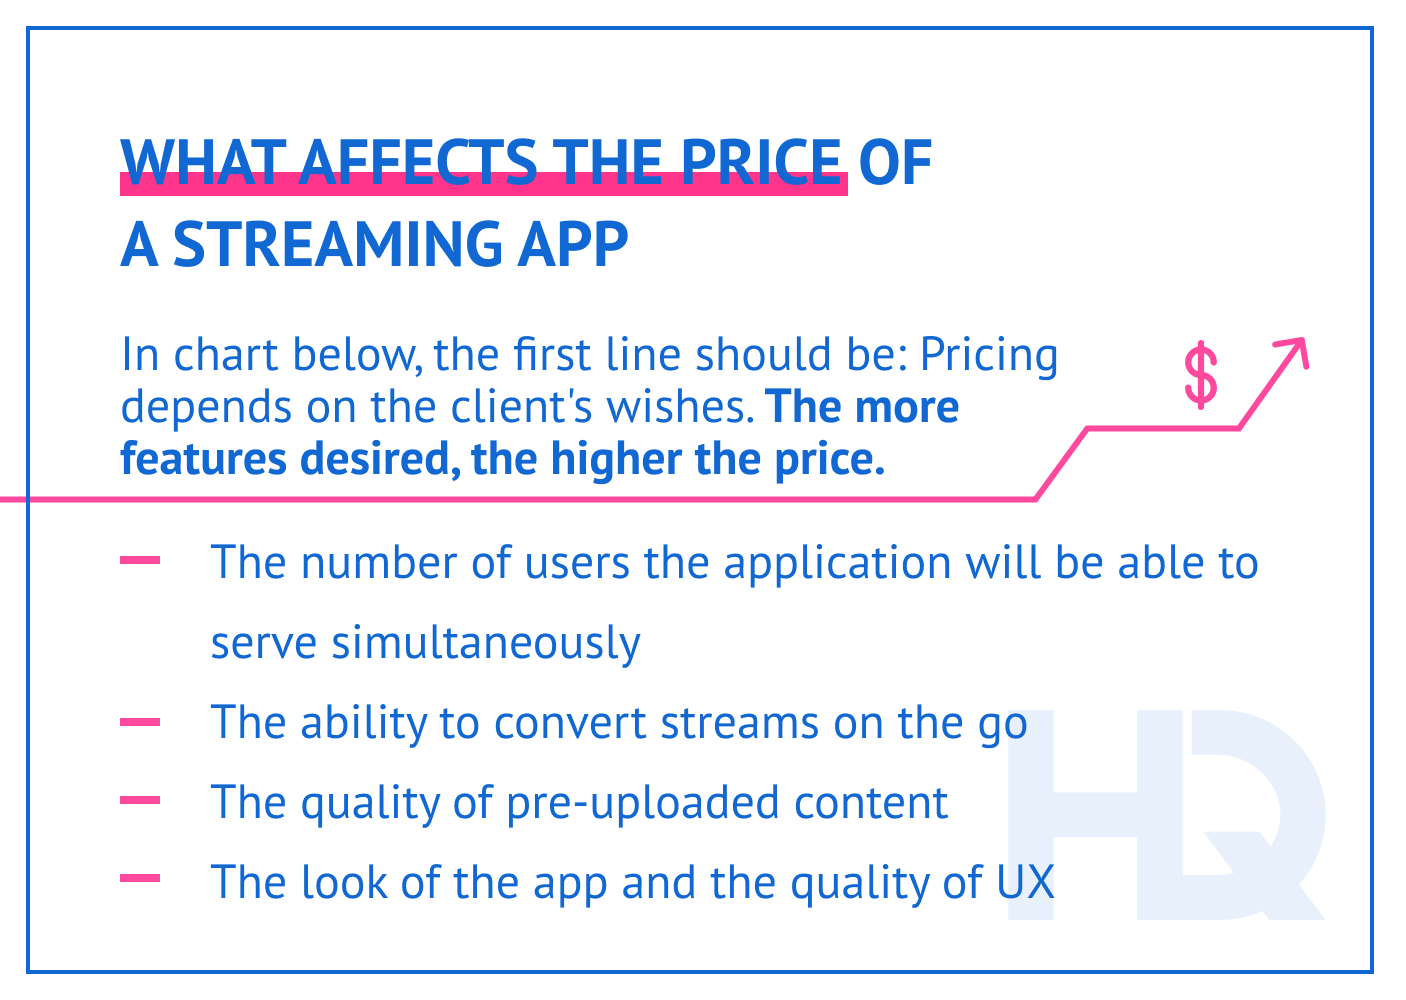 What parameters affect the price of a streaming app.